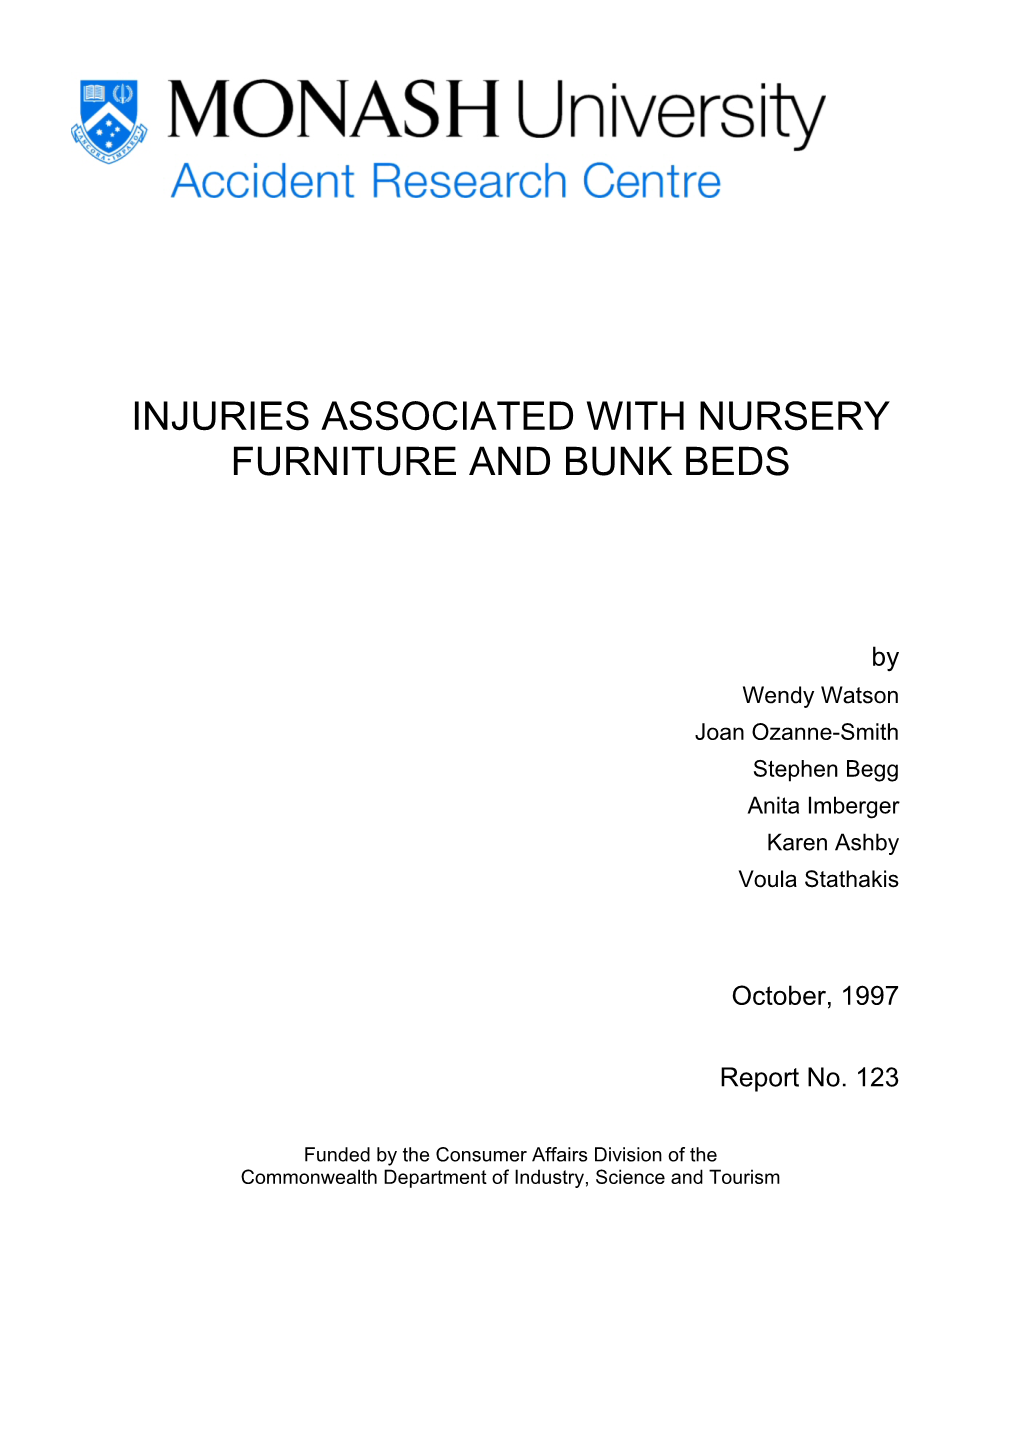 Injuries Associated with Nursery Furniture and Bunk Beds